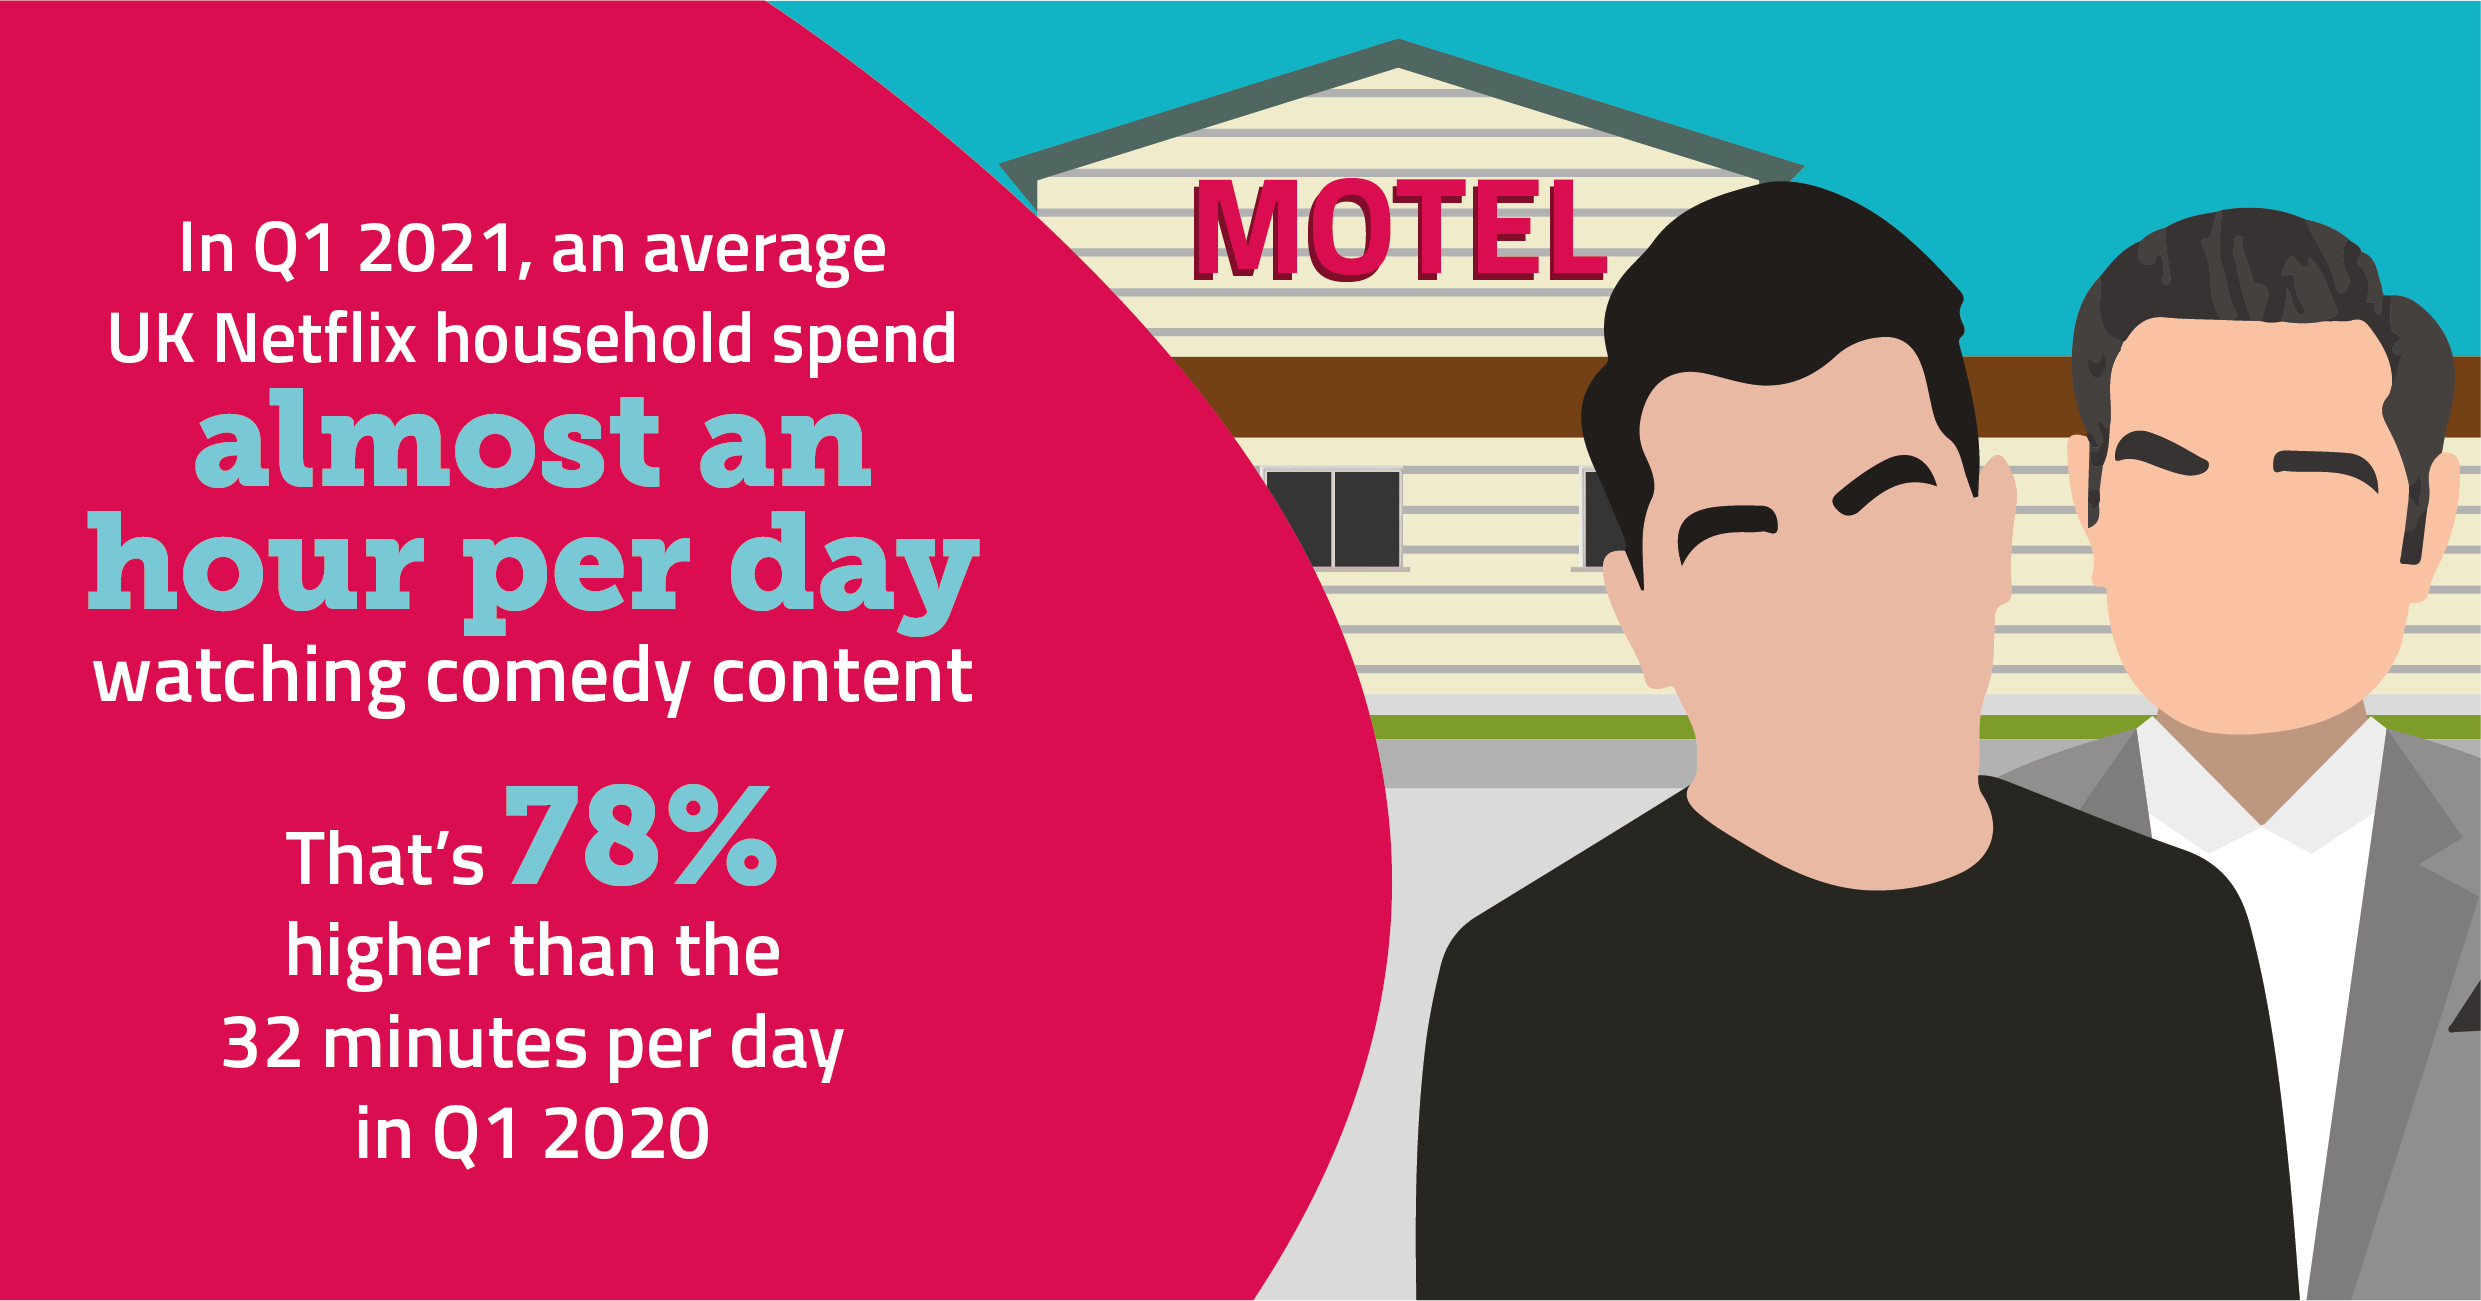 In Q1 2021, an average uk netflix household spend almost an hour a day watching comedy content. That's 78% higher than the 32 minutes per day in Q1 2020.